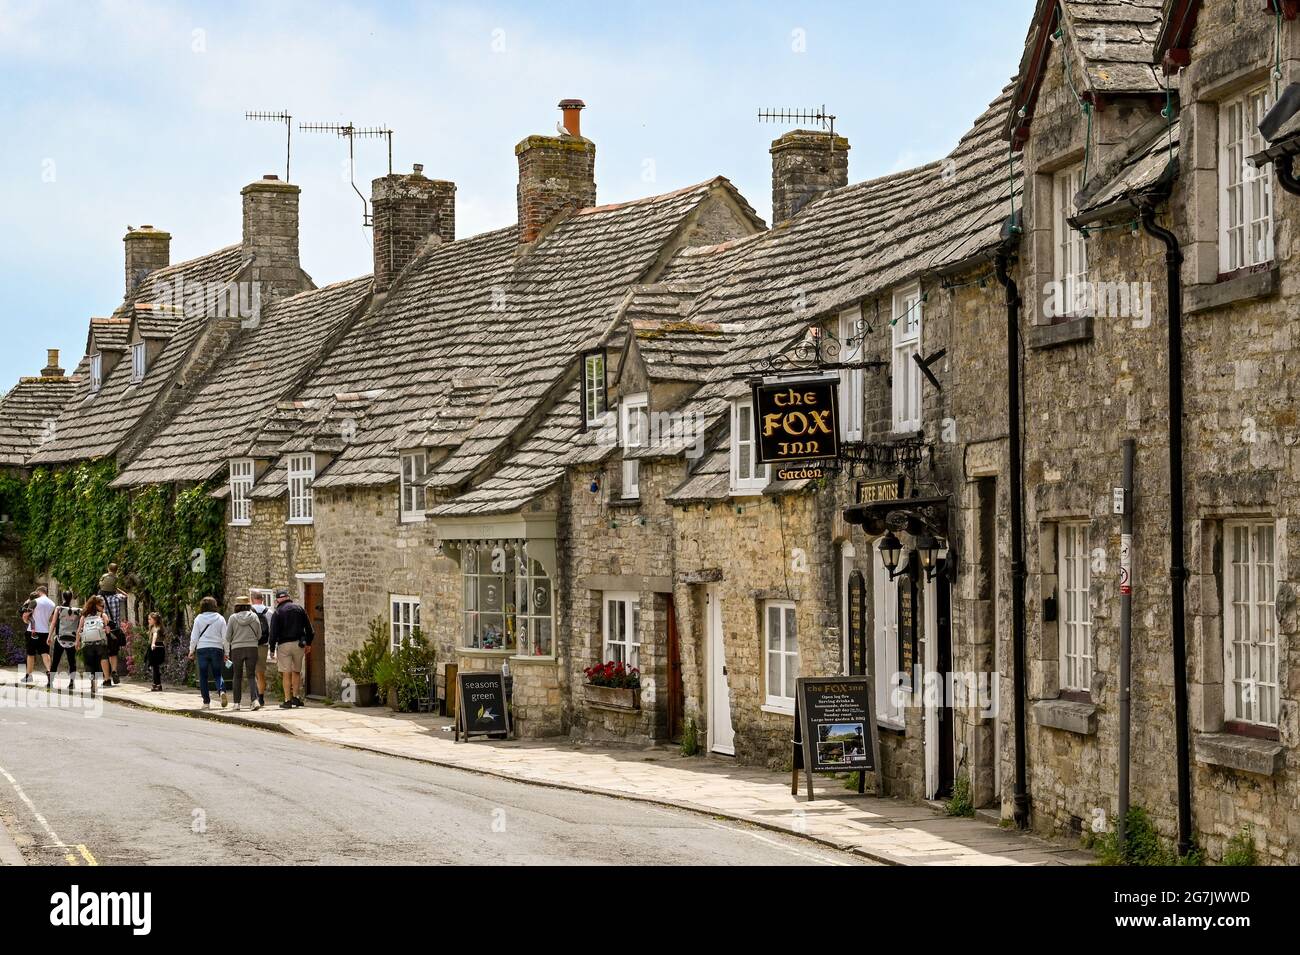 Corfe Castle, Dorset, England - June 2021: Small pub in one of the streets of old traditional houses in the village of Corfe Castle.. Stock Photo